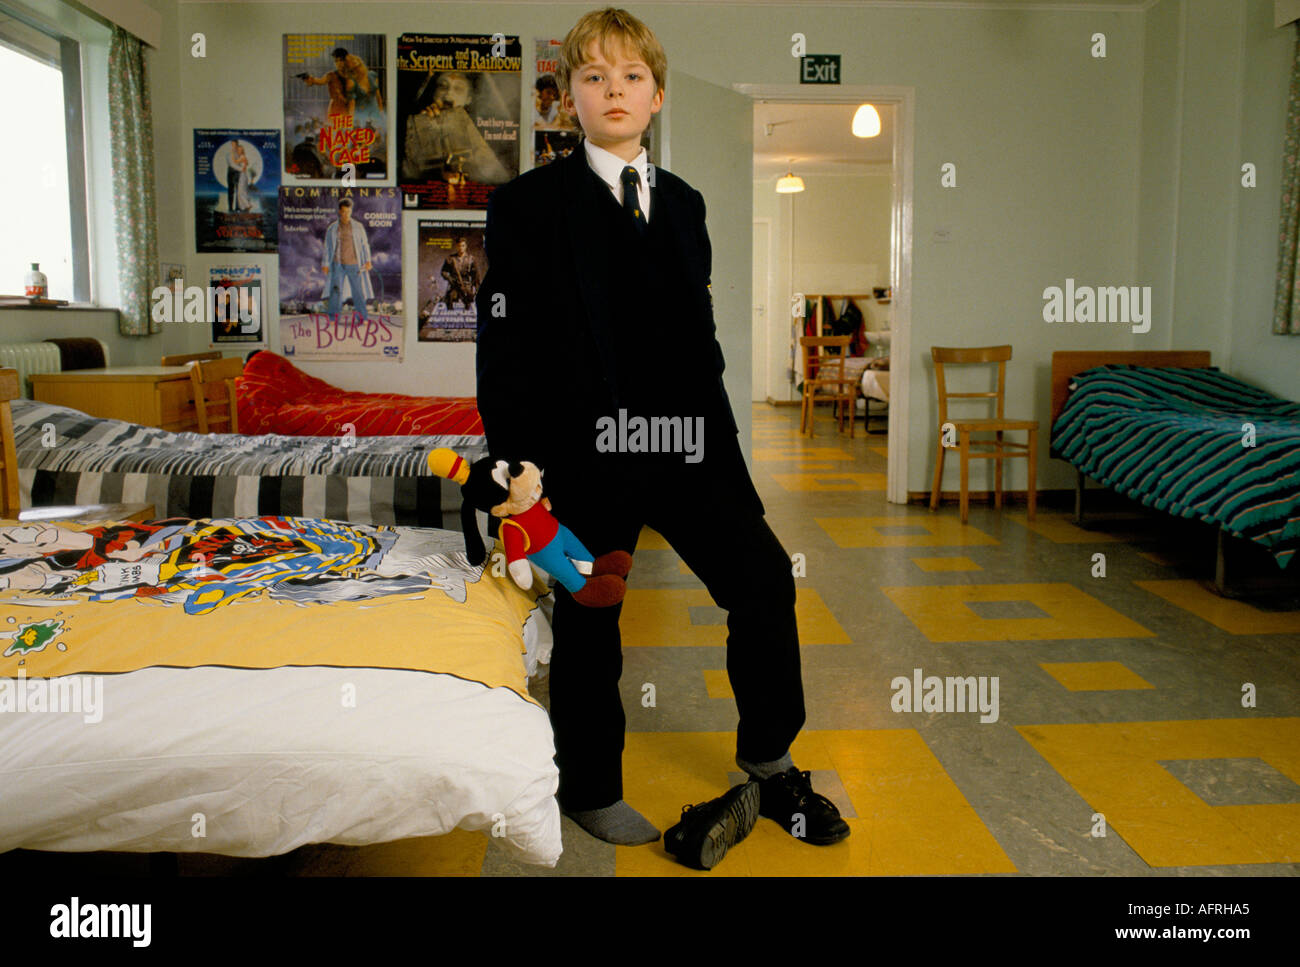 Boarding School Bedroom High Resolution Stock Photography And Images Alamy